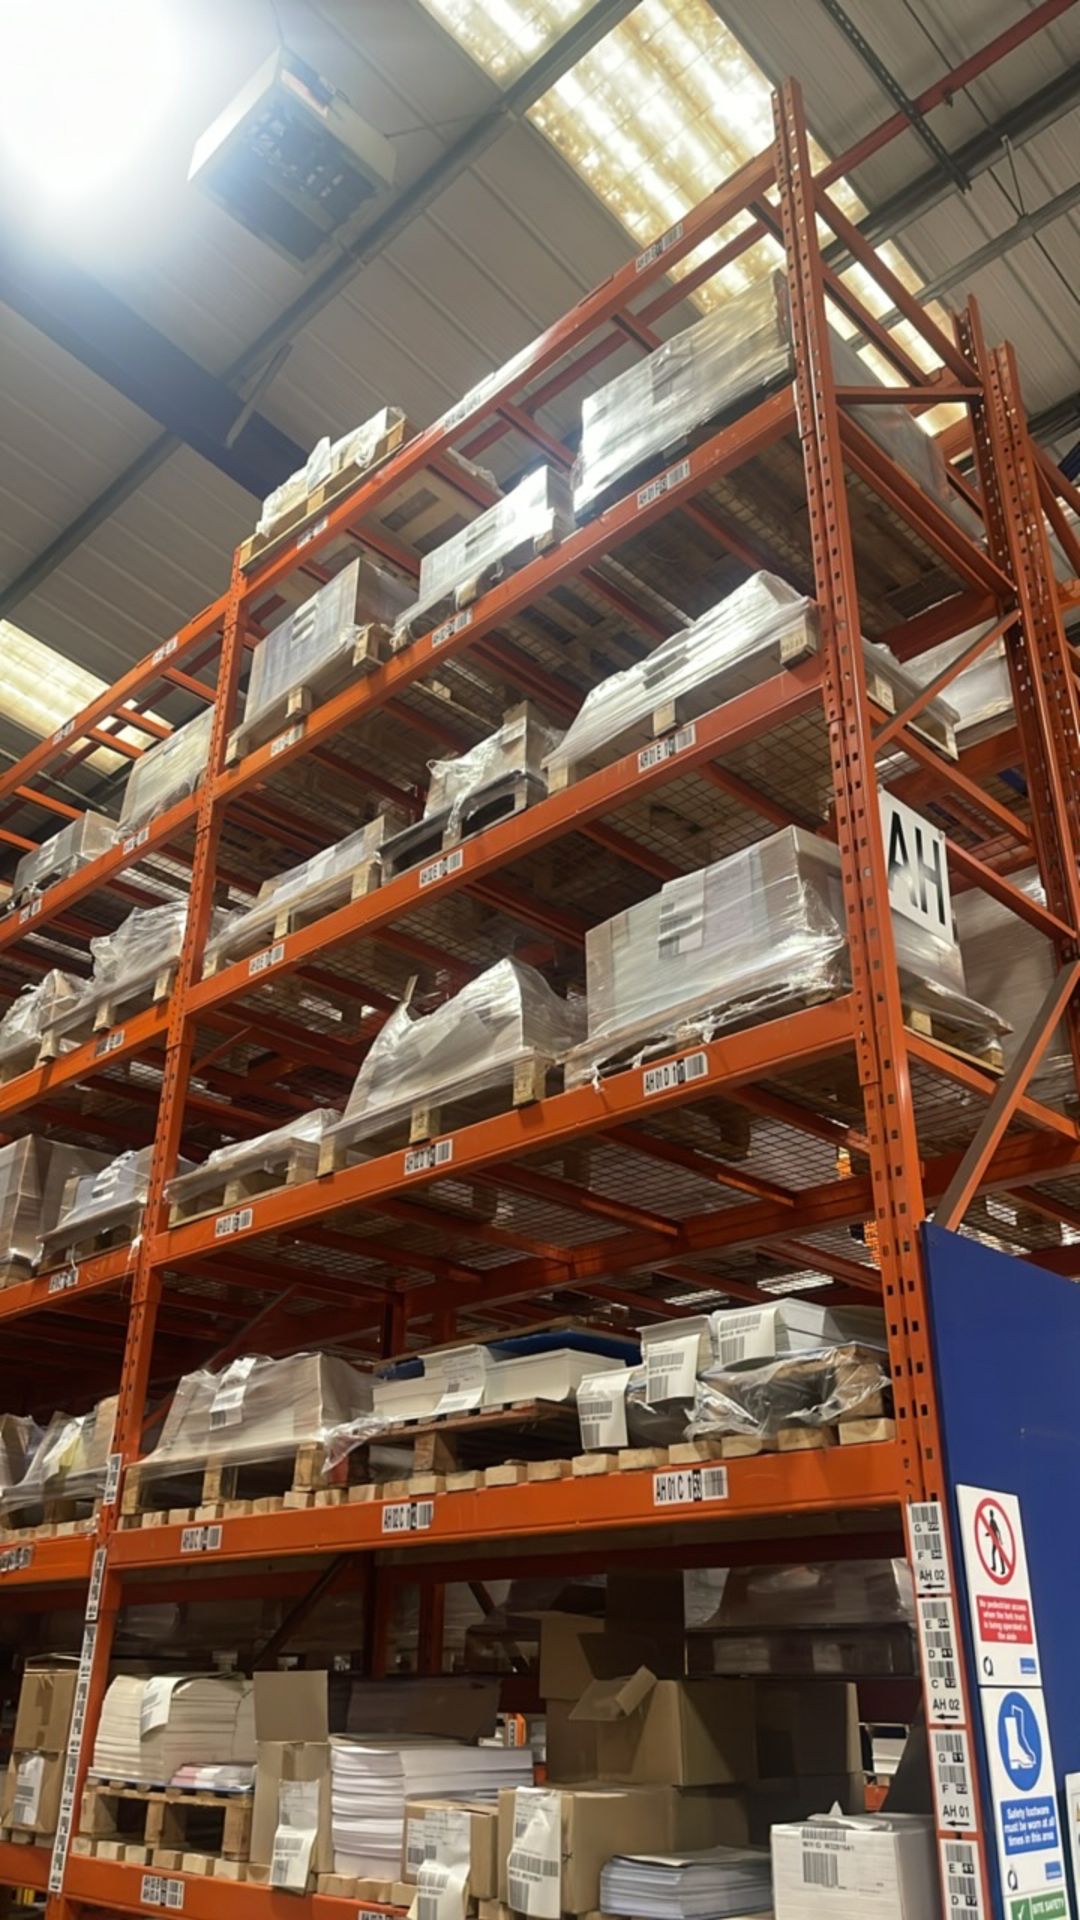 24 Bays Of Boltless Pallet Racking - Image 5 of 9